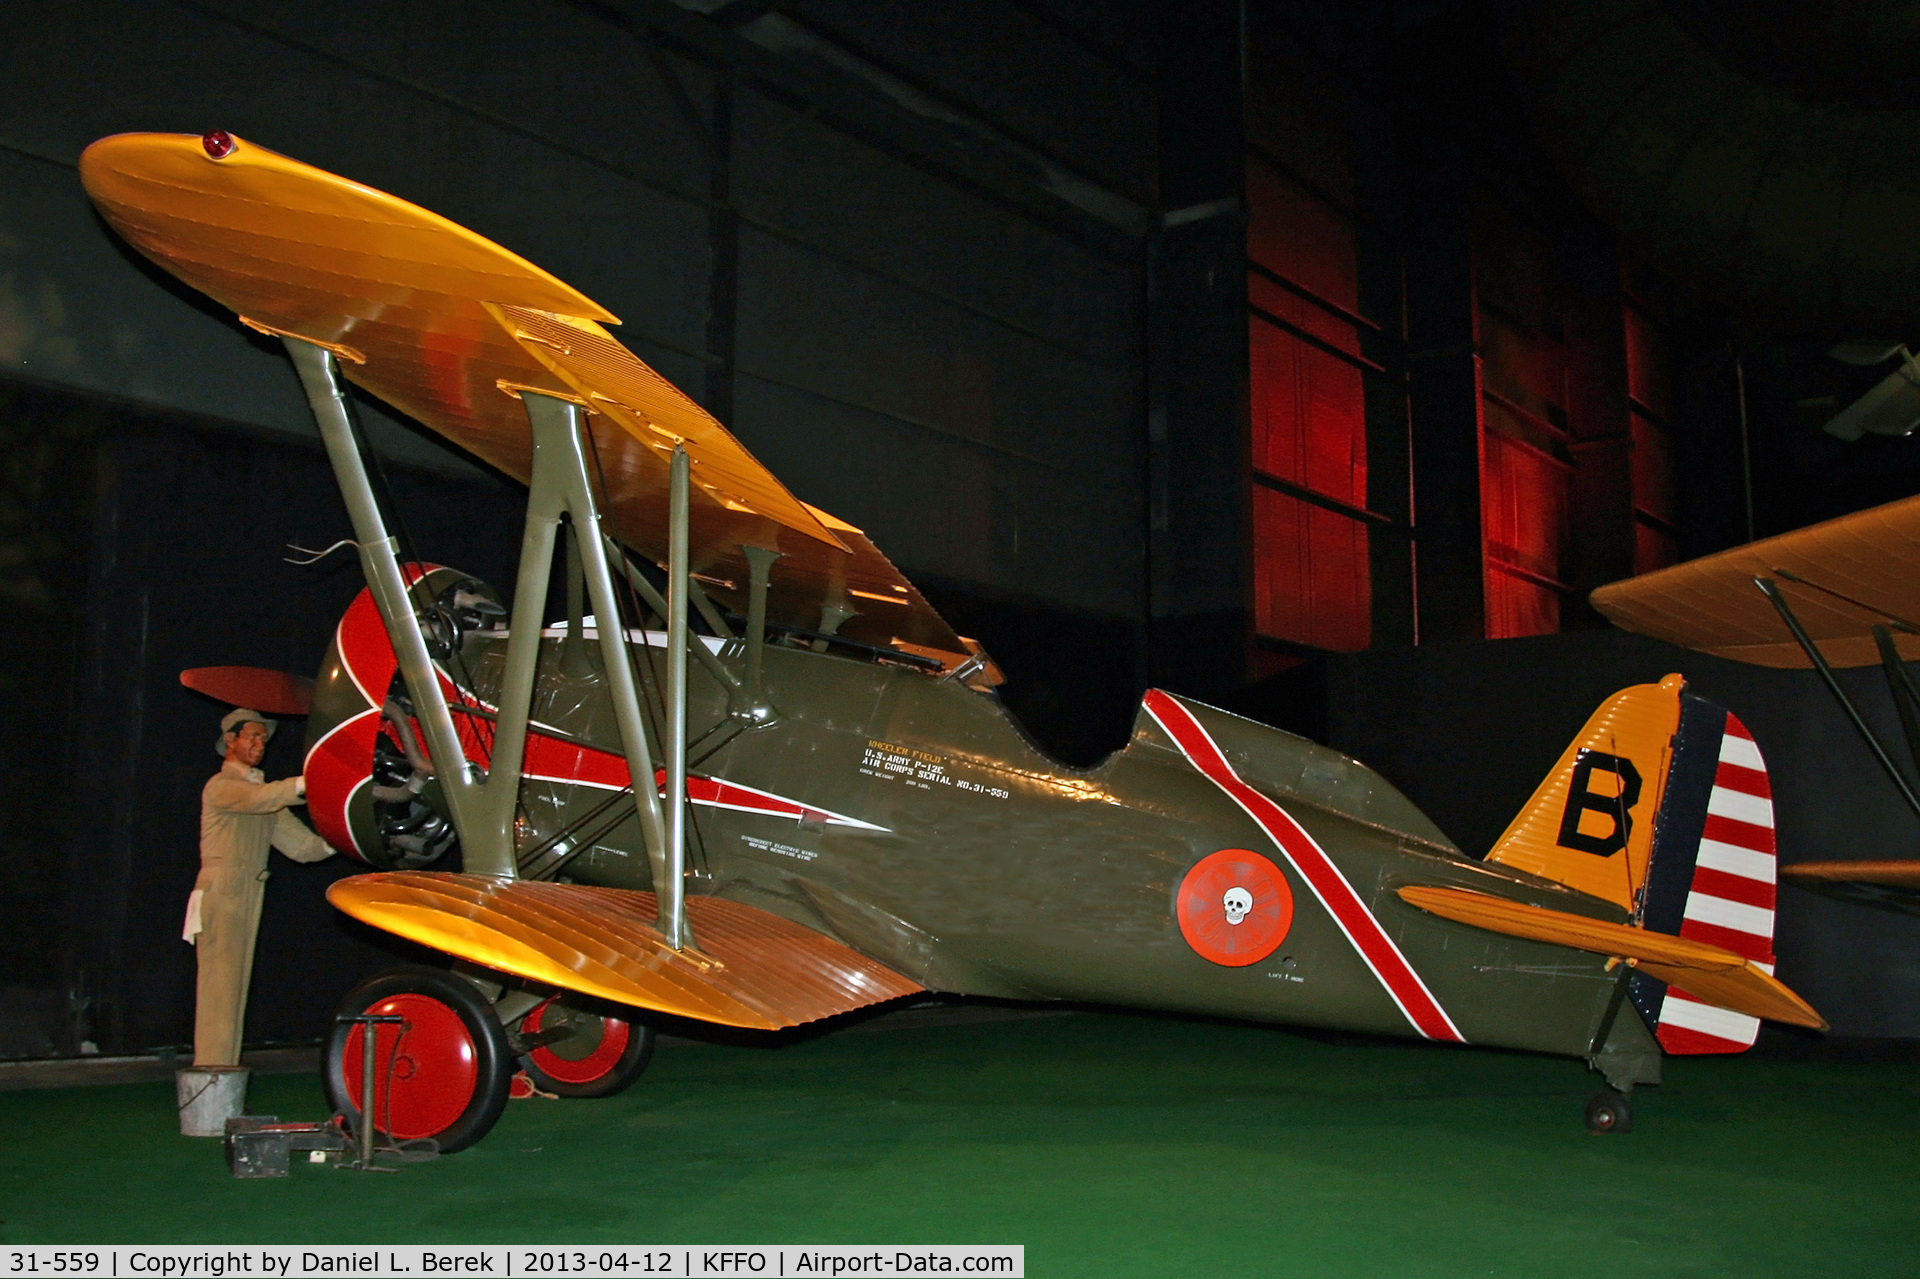 31-559, 1931 Boeing P-12E C/N 1488, The P-12 was one of the most successful U.S. interwar fighers.